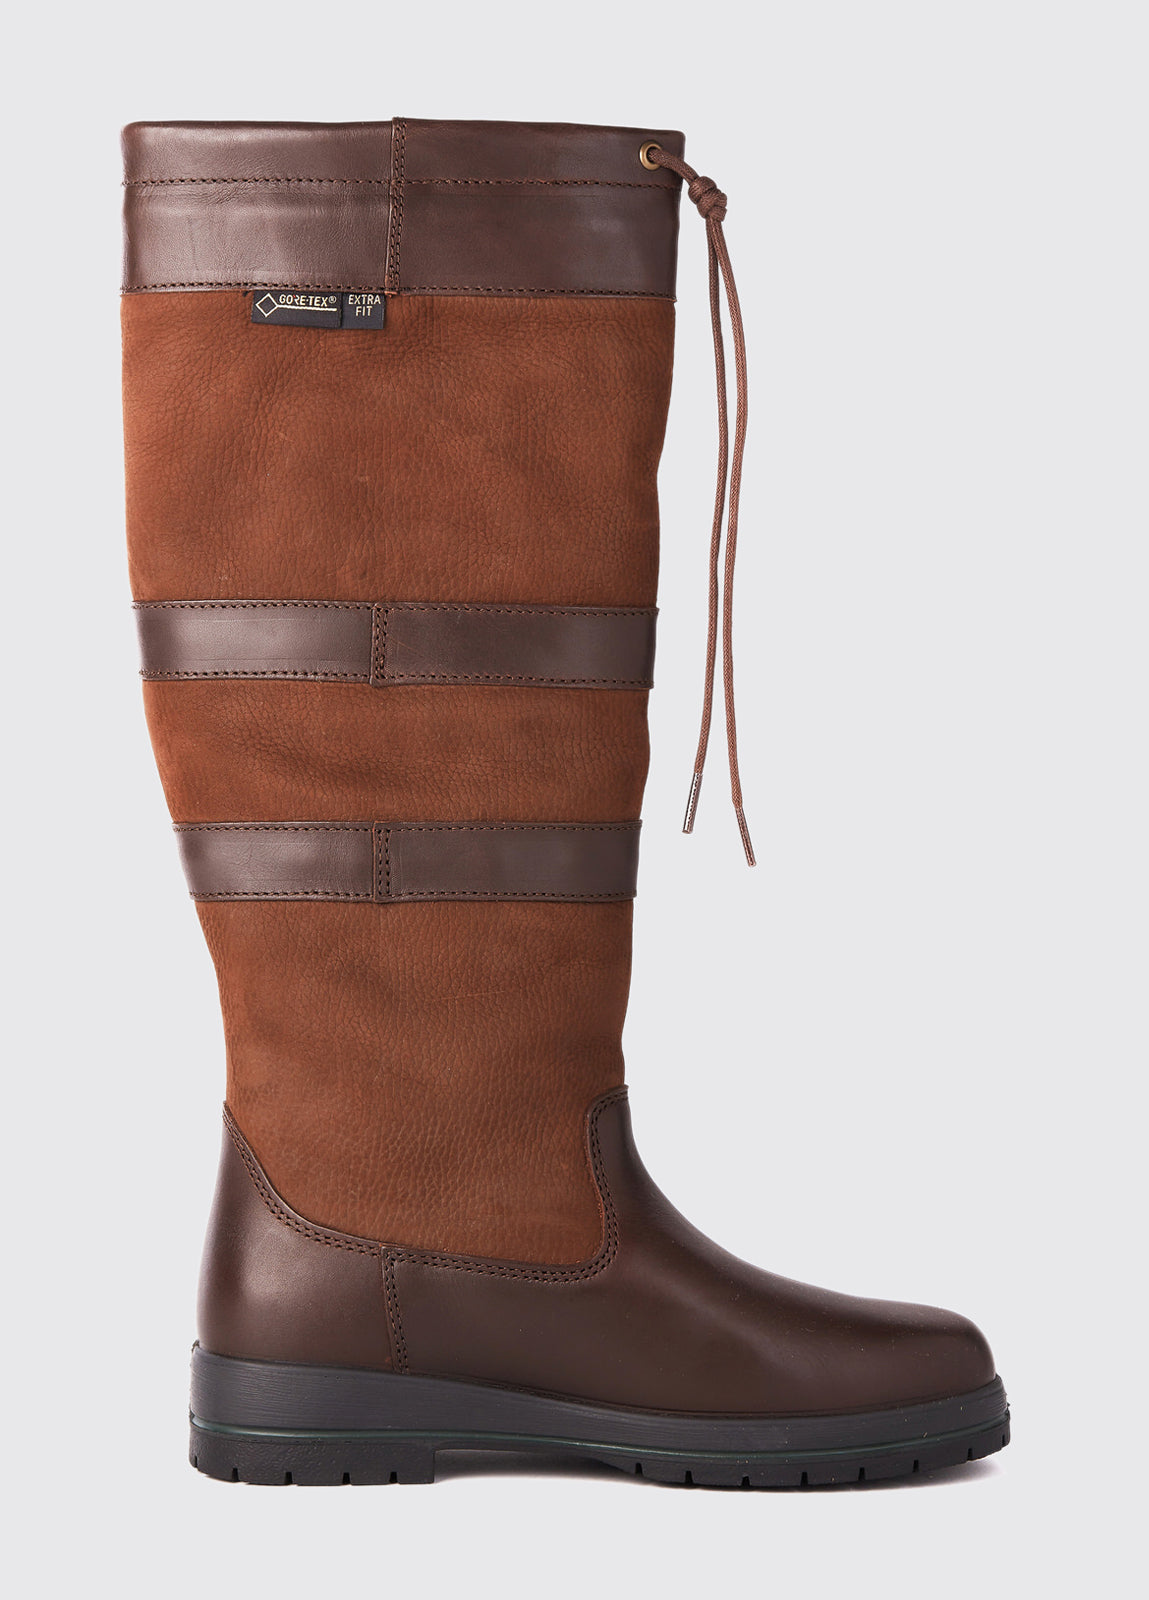 Dubarry Galway Extrafit Country Boot in Walnut